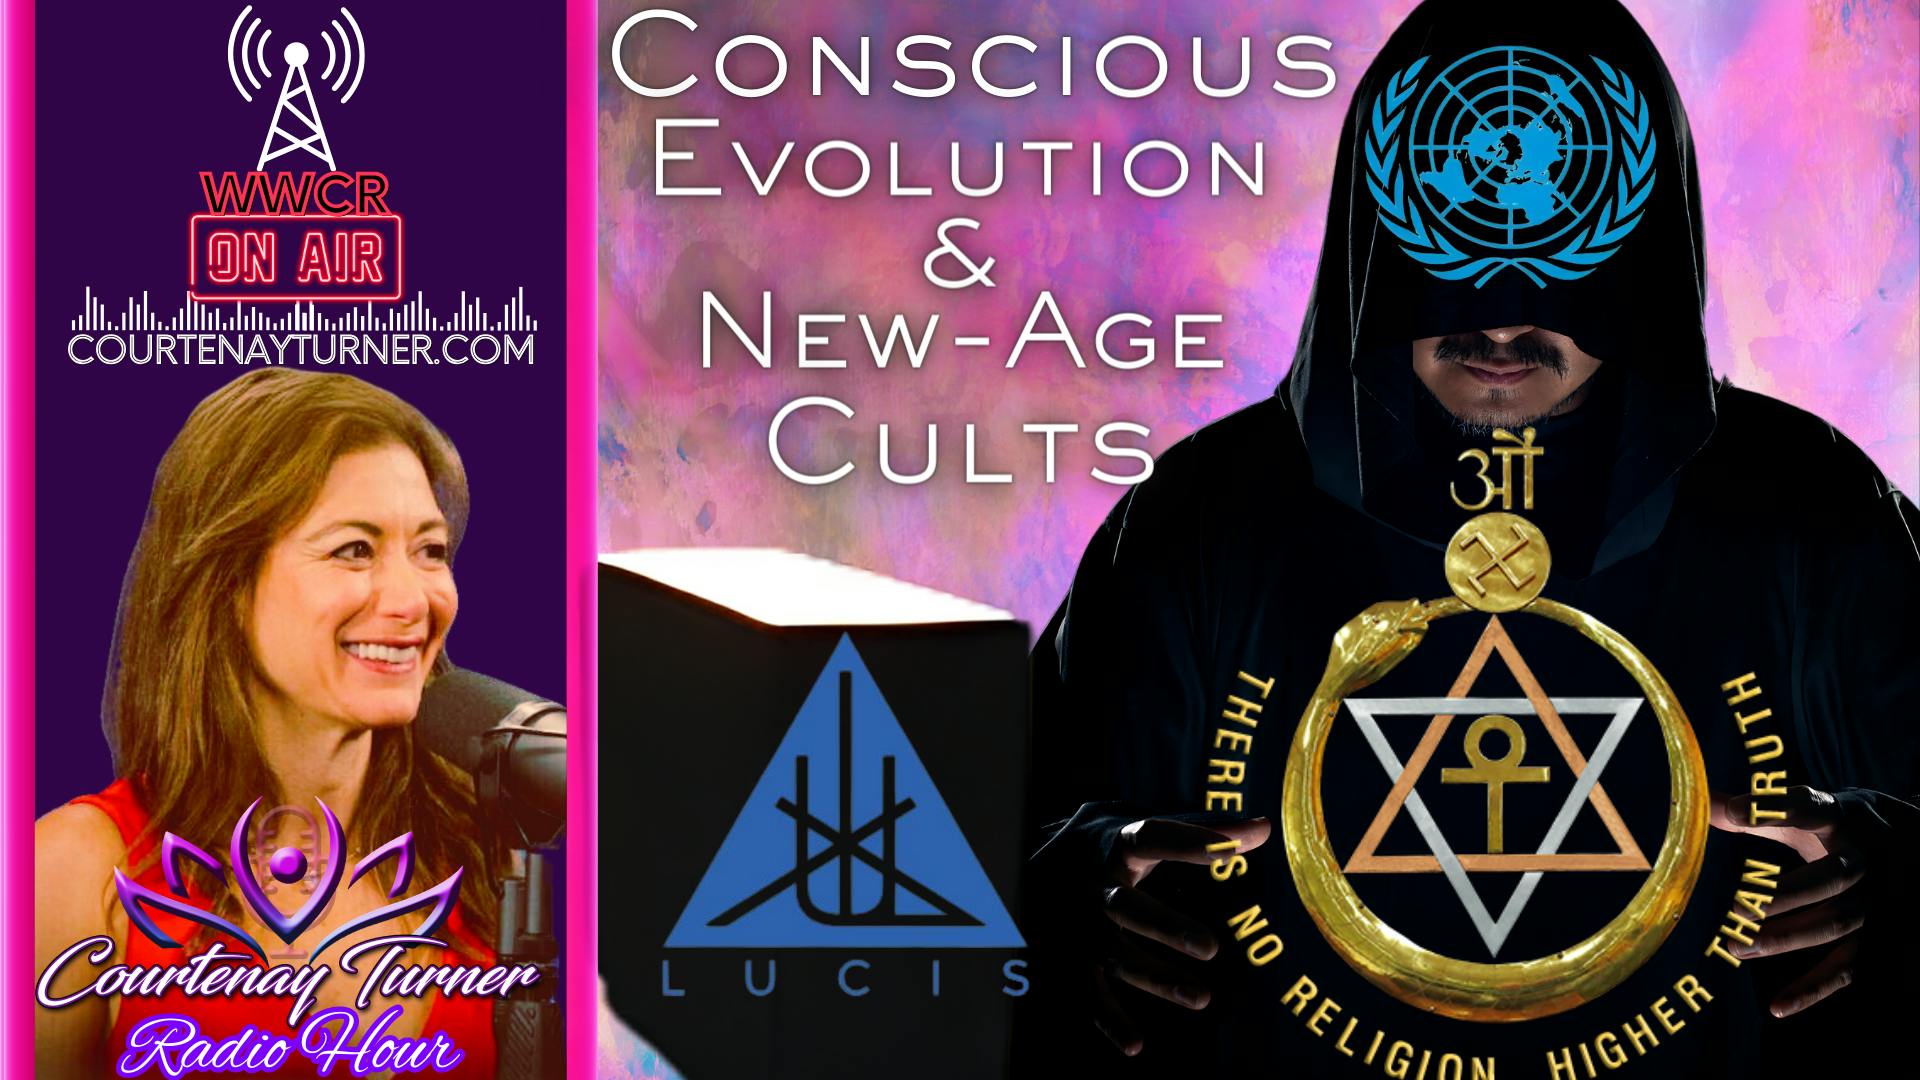 Conscious Evolution & New-Age Cults | Courtenay Turner Radio Hour